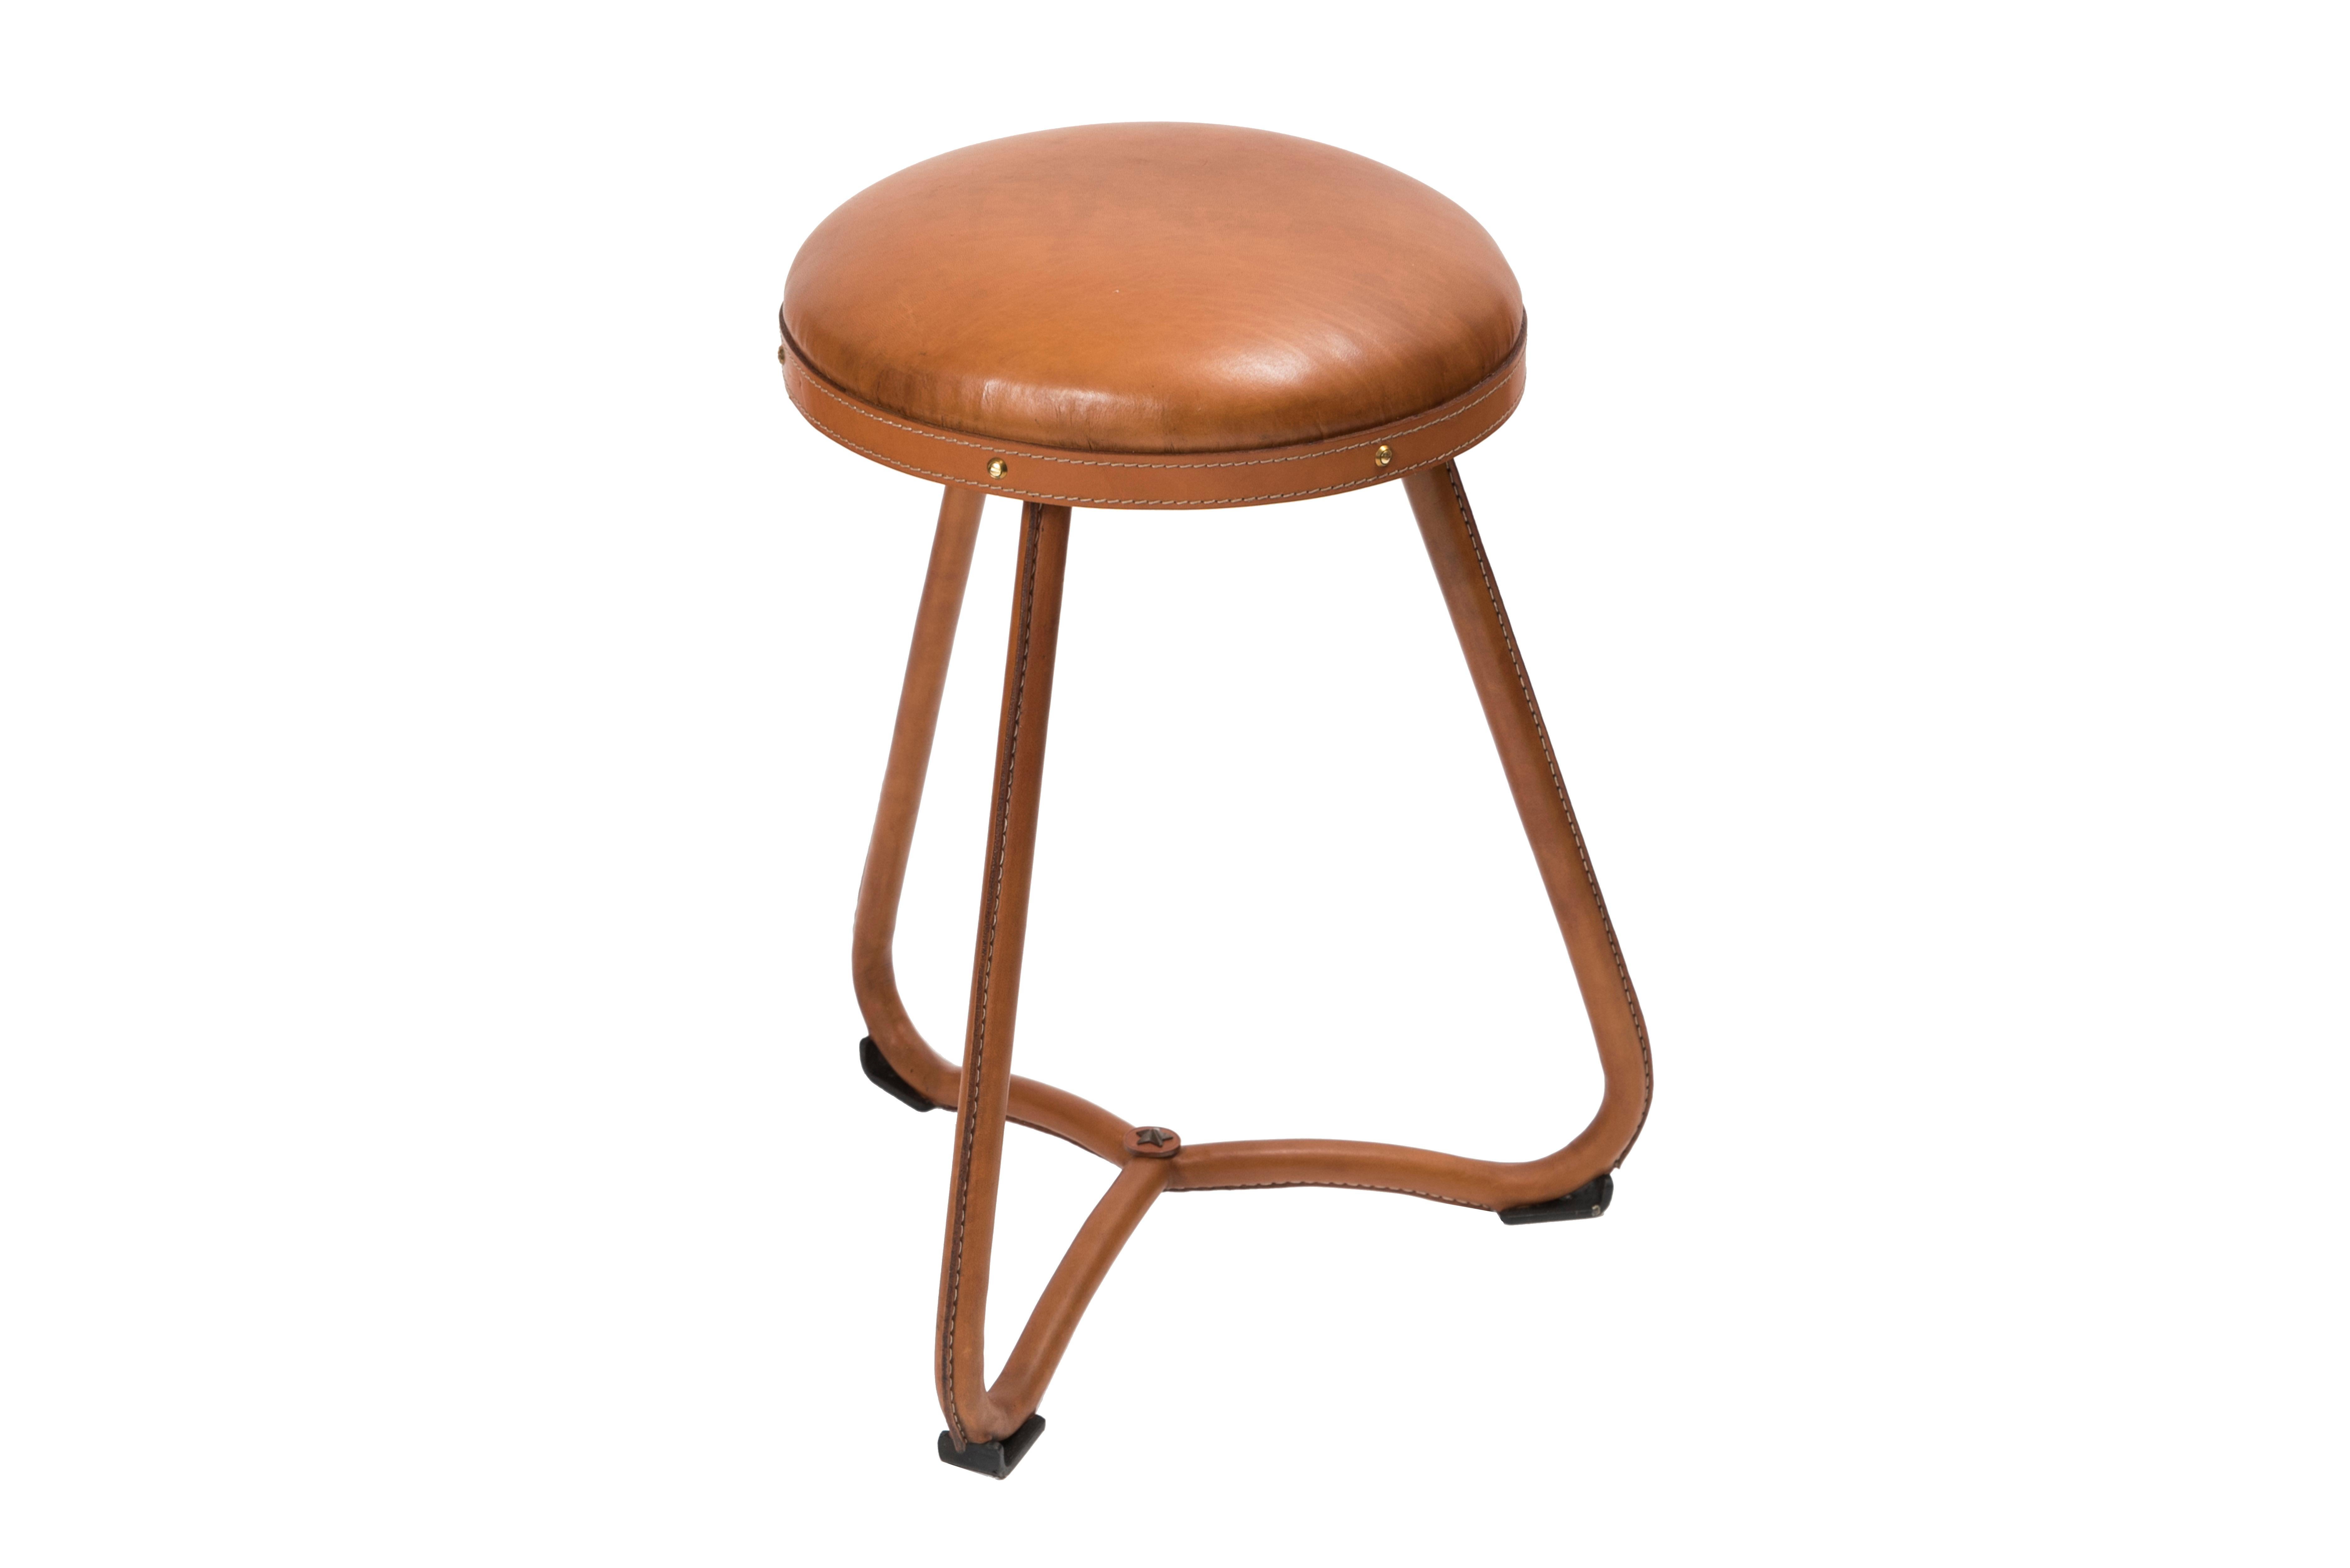 1950ss stitched leather pair of stools by Jacques Adnet,
France.